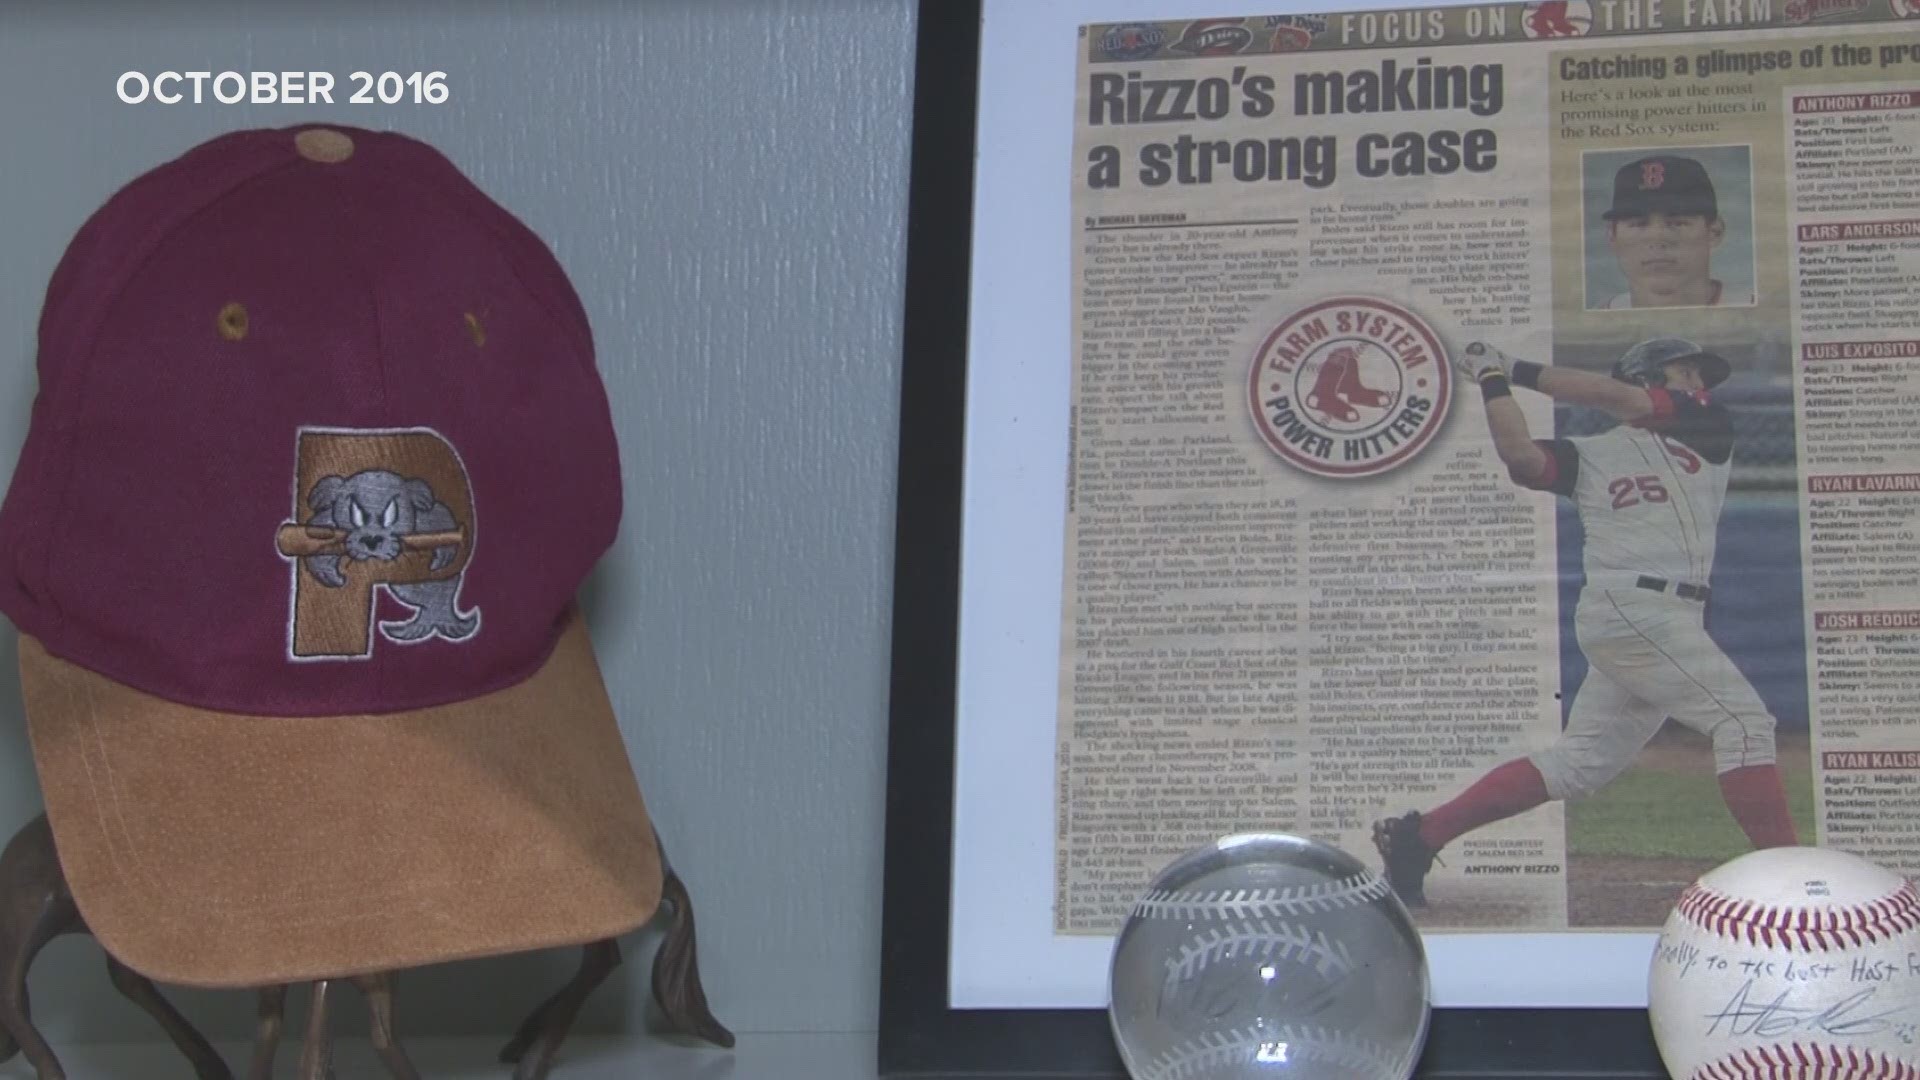 The Weldners opened their home to Anthony Rizzo when he played for the Portland Sea Dogs, and their hearts remained open to him during his 2016 World Series run with the Chicago Cubs.